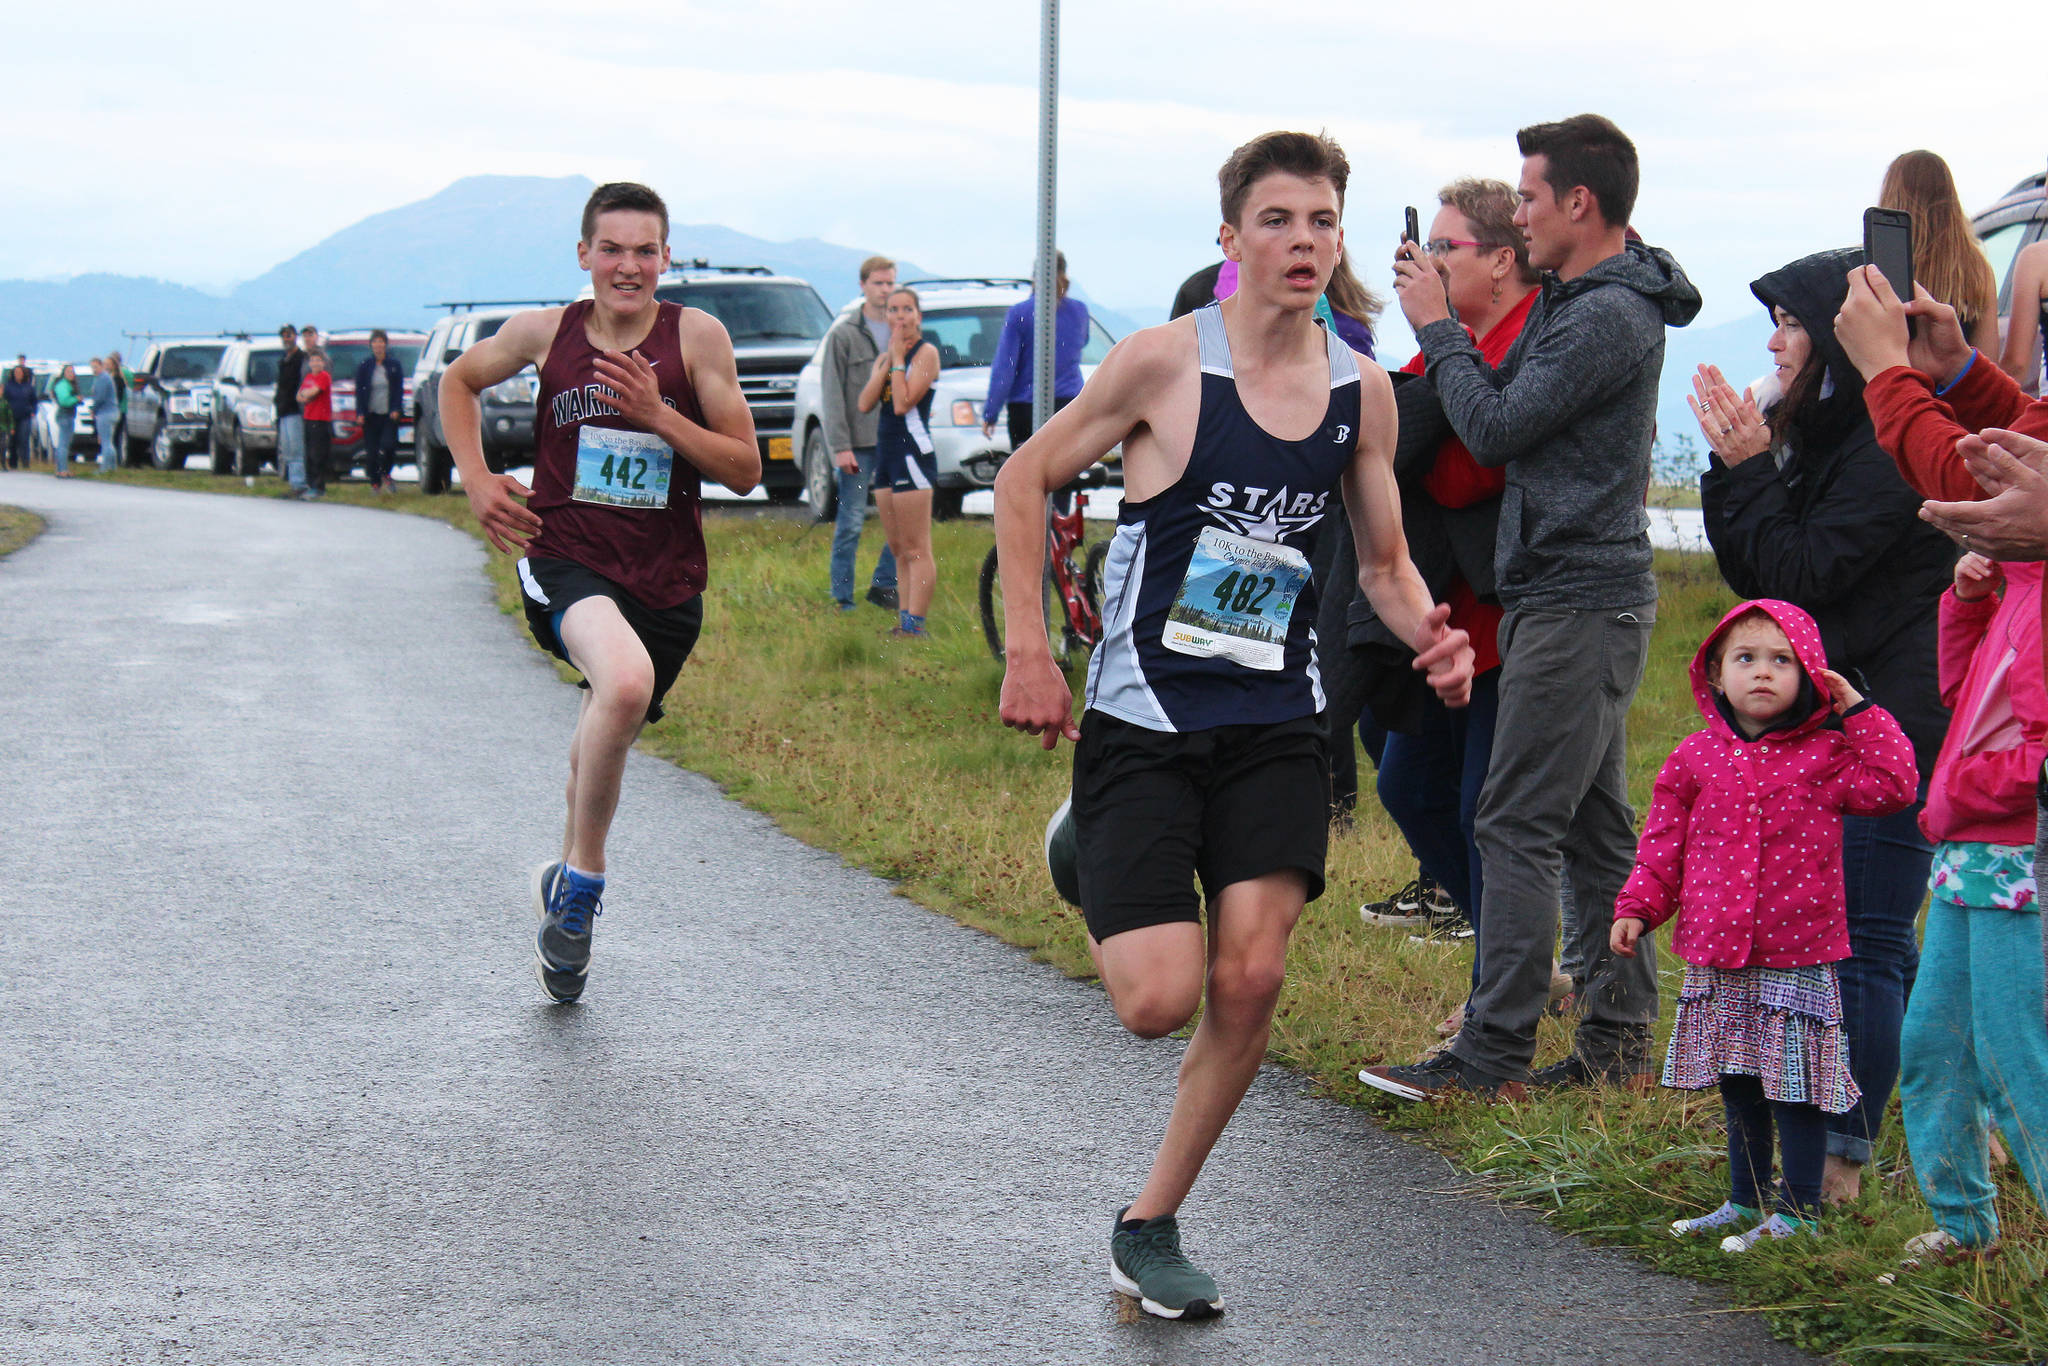 Soldotna’s Nathanael Johnson approaches the finish line of the boys 5K Spit Run with Nikolaevsk School’s Justin Trail on his heels Saturday, Sept. 7, 2018 during the Homer Invitational held on the Homer Spit in Homer, Alaska. (Photo by Megan Pacer/Homer News)